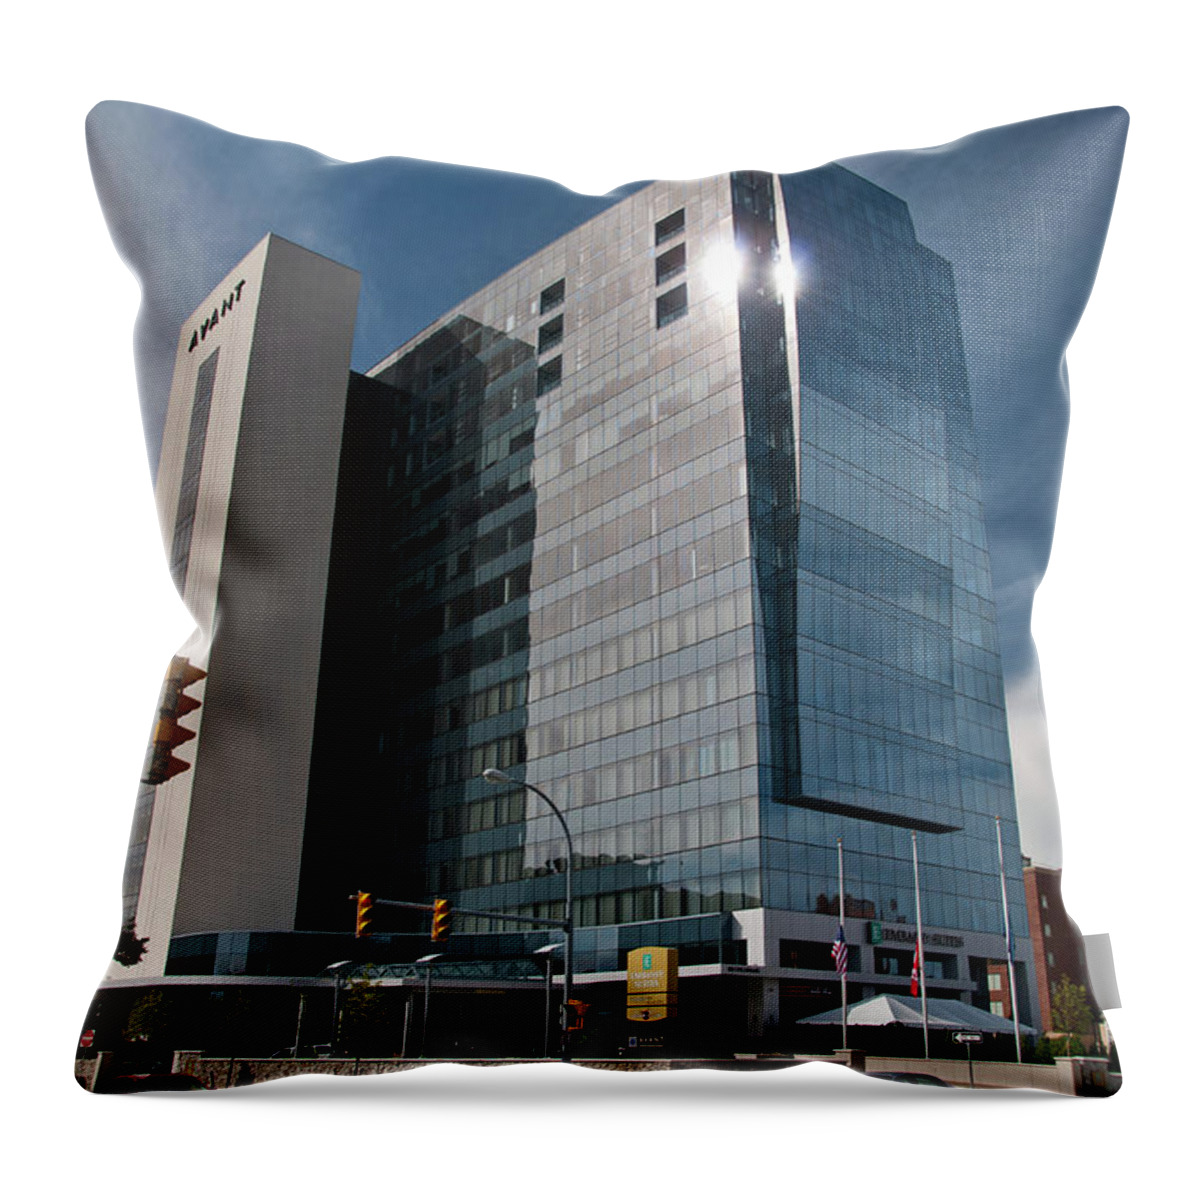 Architecture Throw Pillow featuring the photograph Embassy Suites 2916 by Guy Whiteley